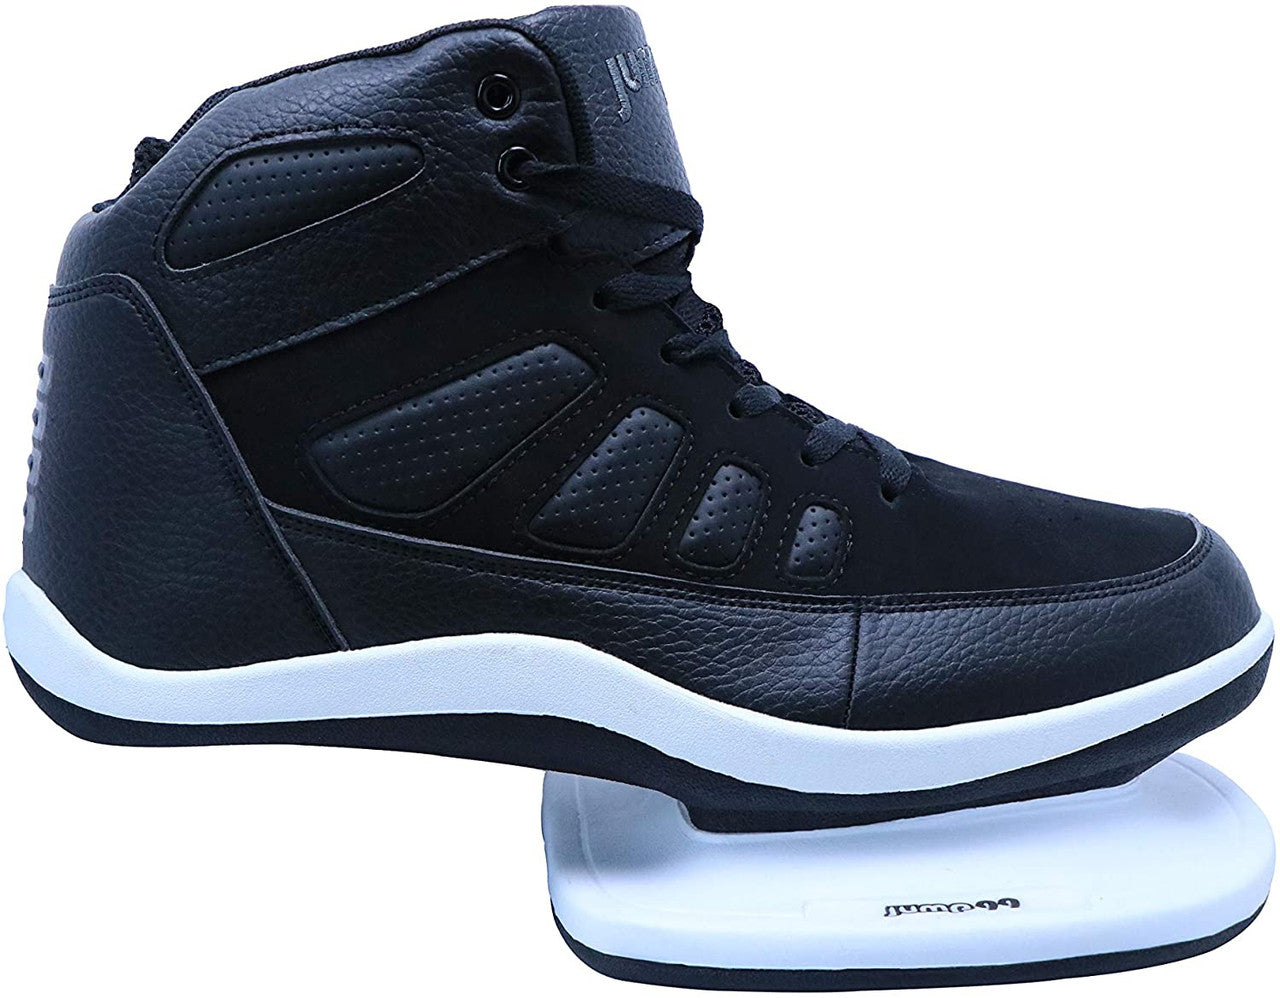 Jump 99 plyometric basketball training shoes for sale - Strength Sneakers - back